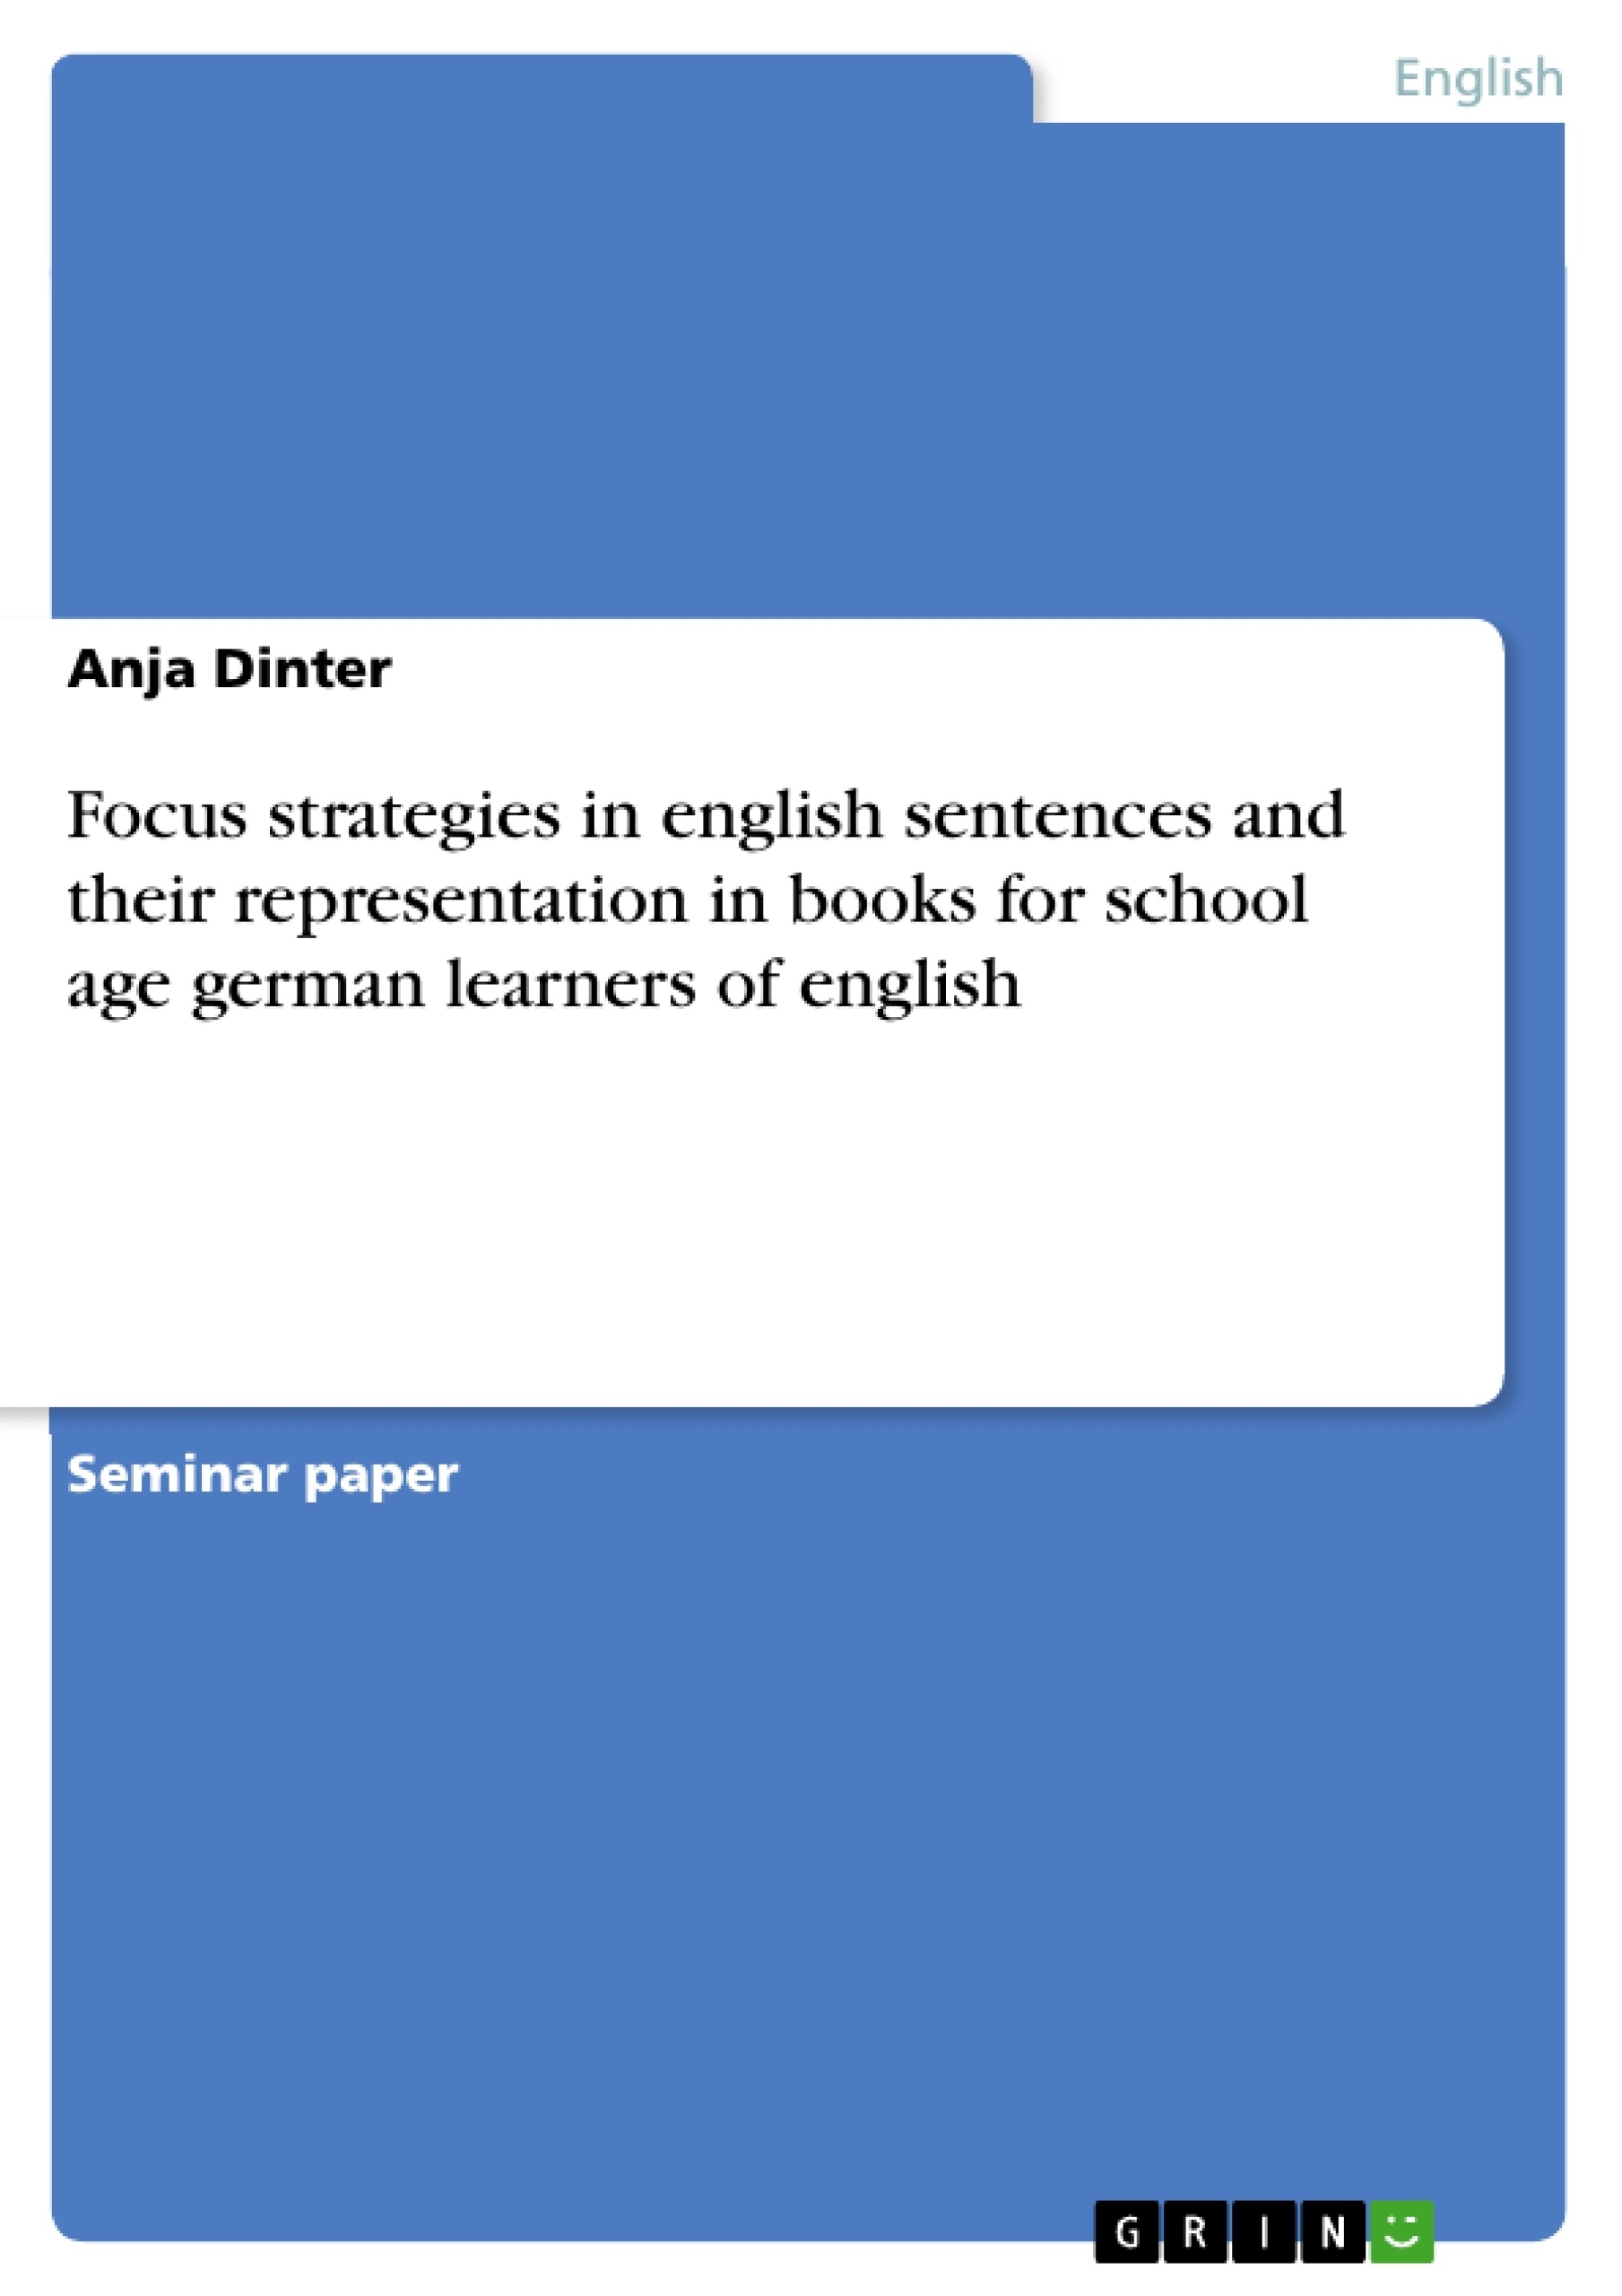 Title: Focus strategies in english sentences and their representation in books for school age german learners of english 